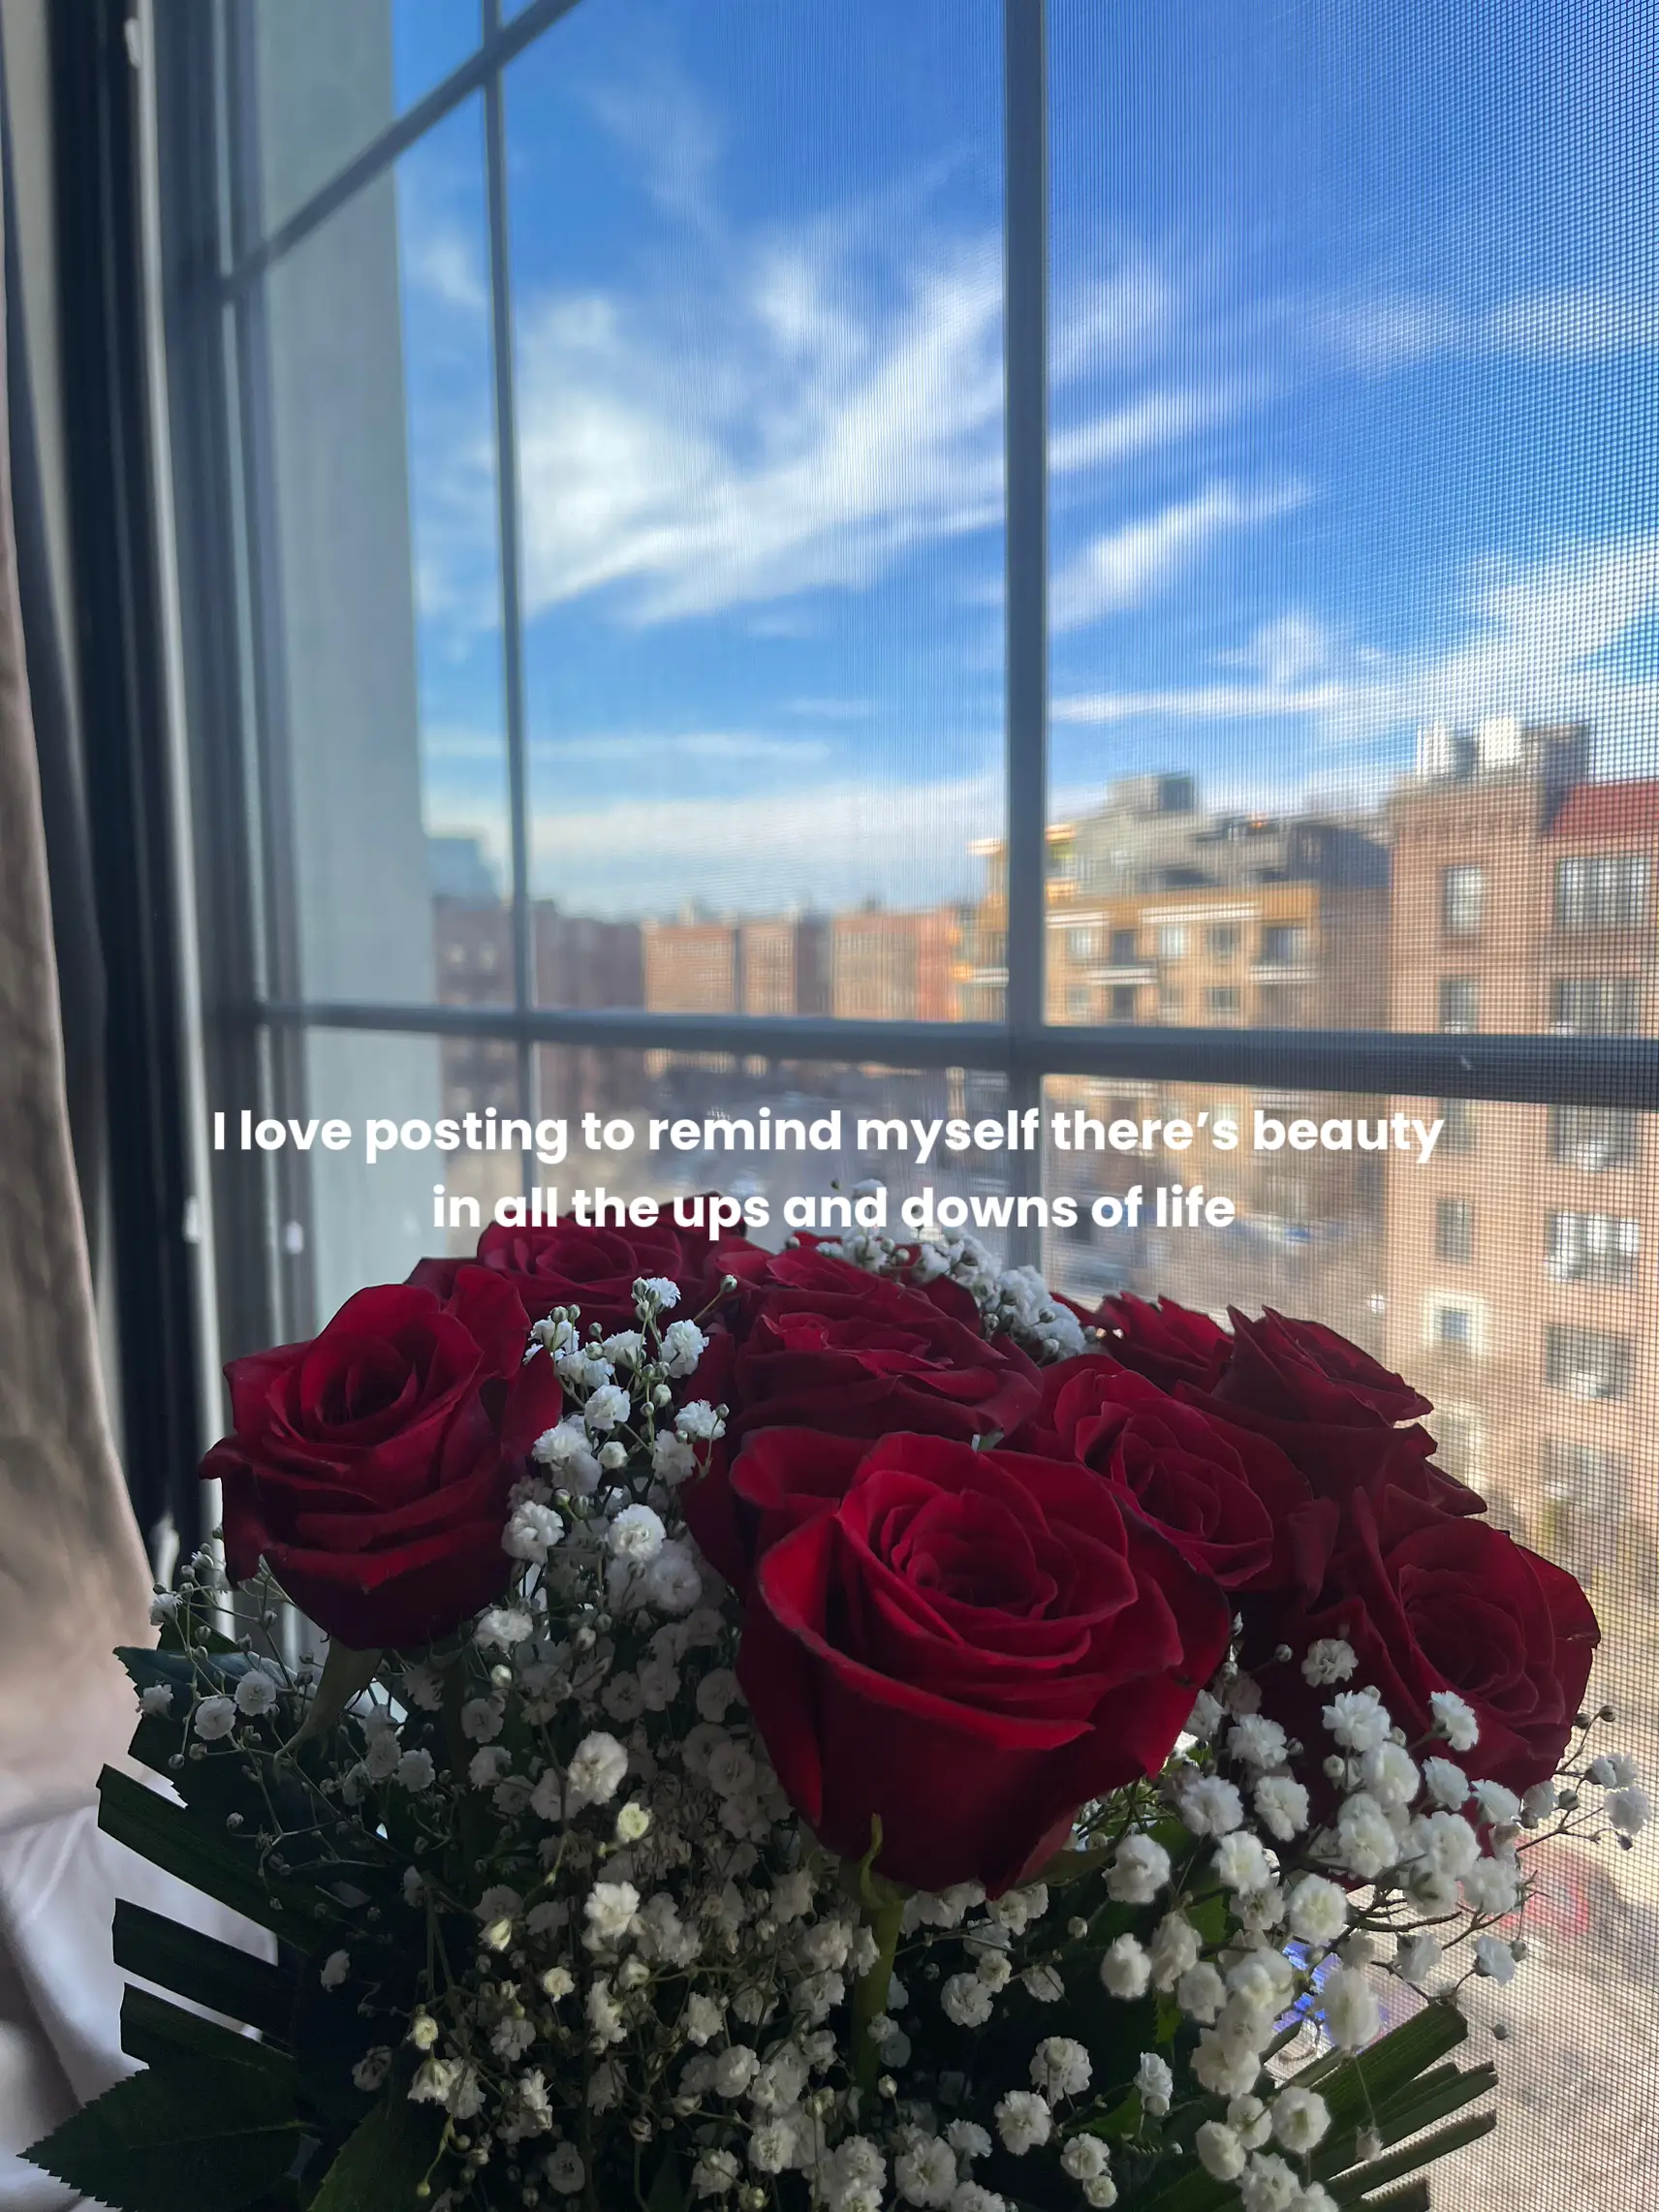  A bouquet of roses in a vase.